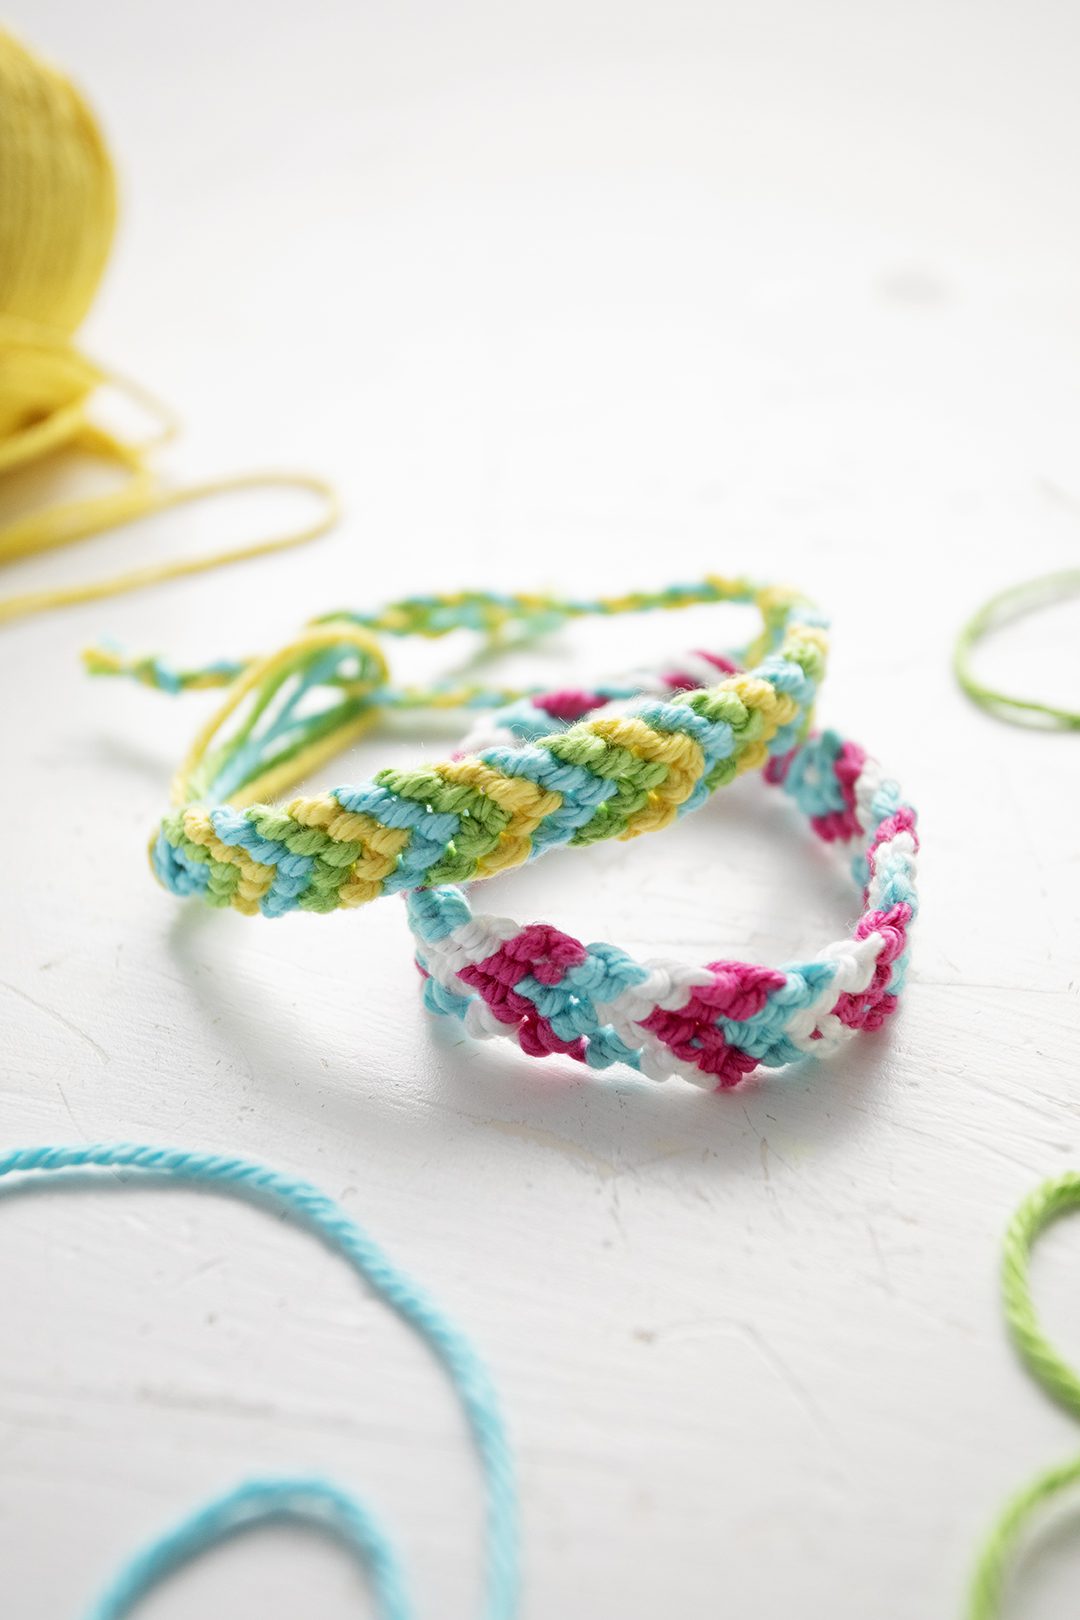 Two chevron pattern bracelets in green, blue, yellow, pink, and white embroidery floss.